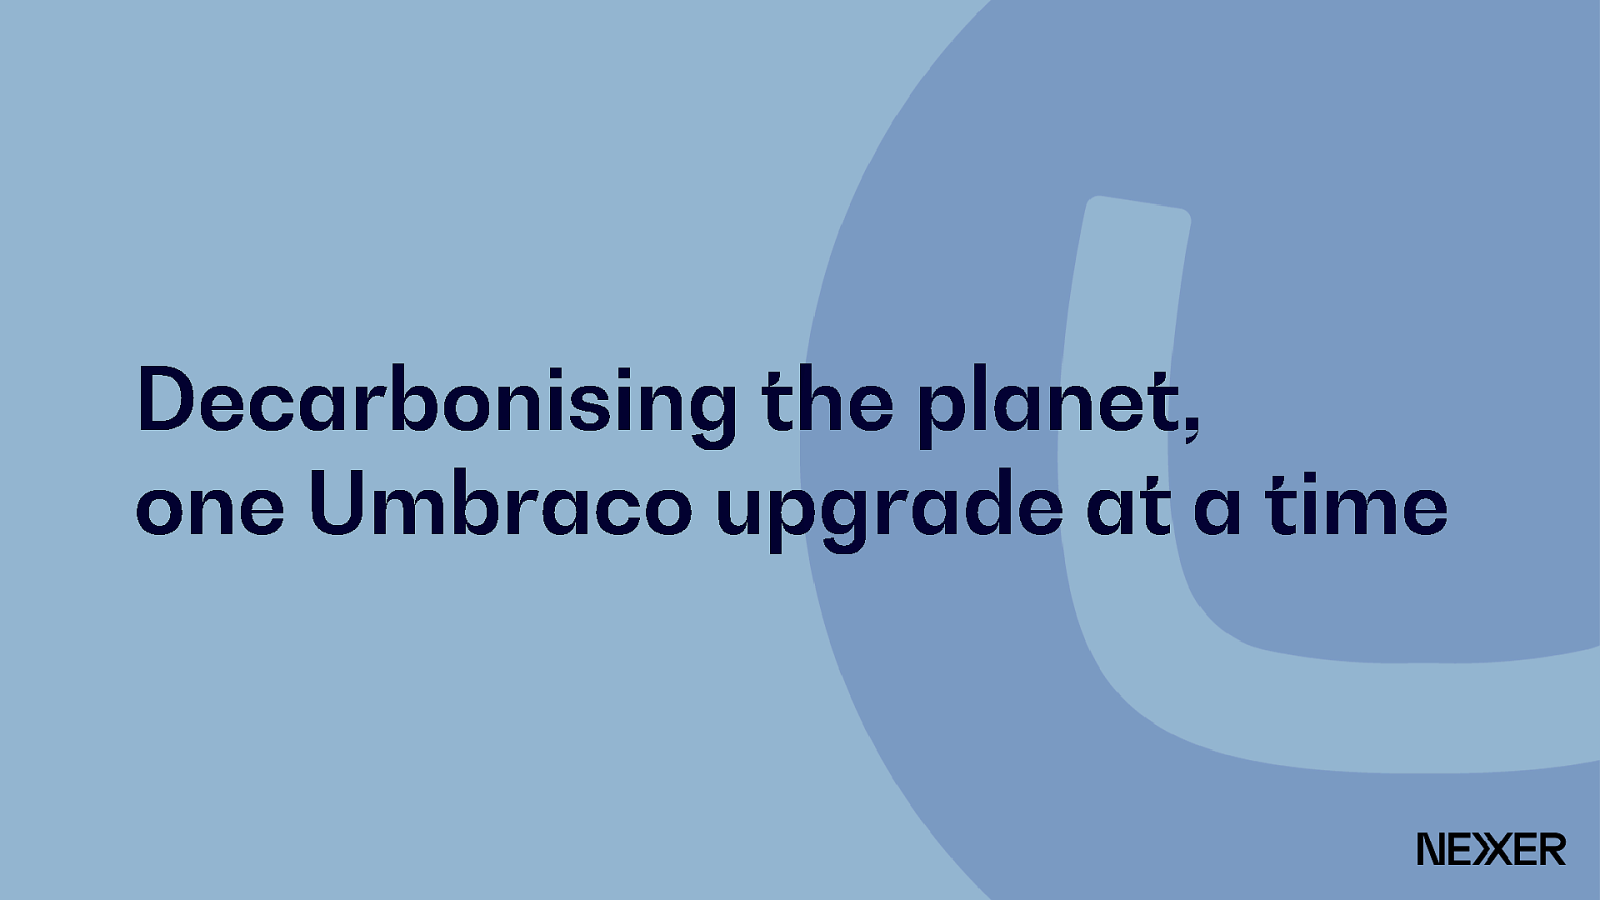 Decarbonising the planet, one Umbraco upgrade at a time